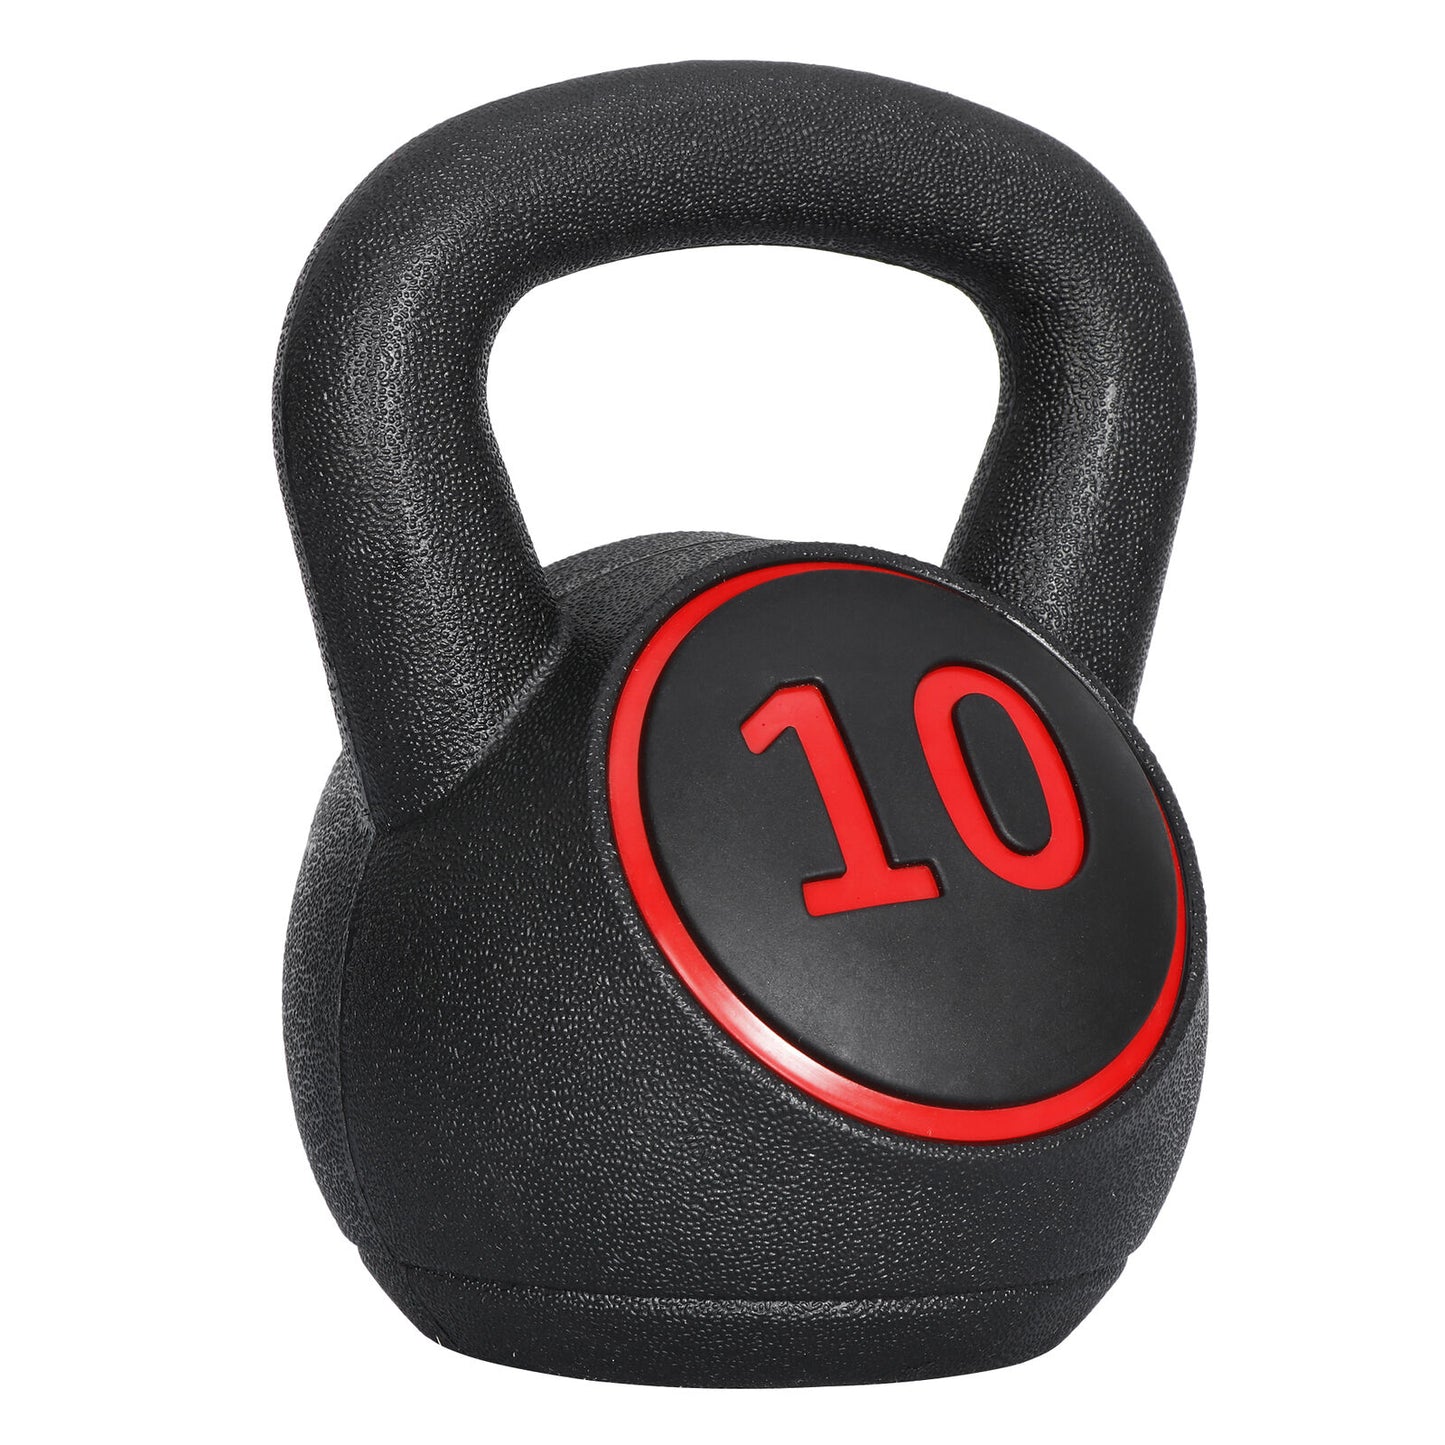 3-Piece Kettlebell Set with Storage Rack Exercise Fitness Weights for Home Gym